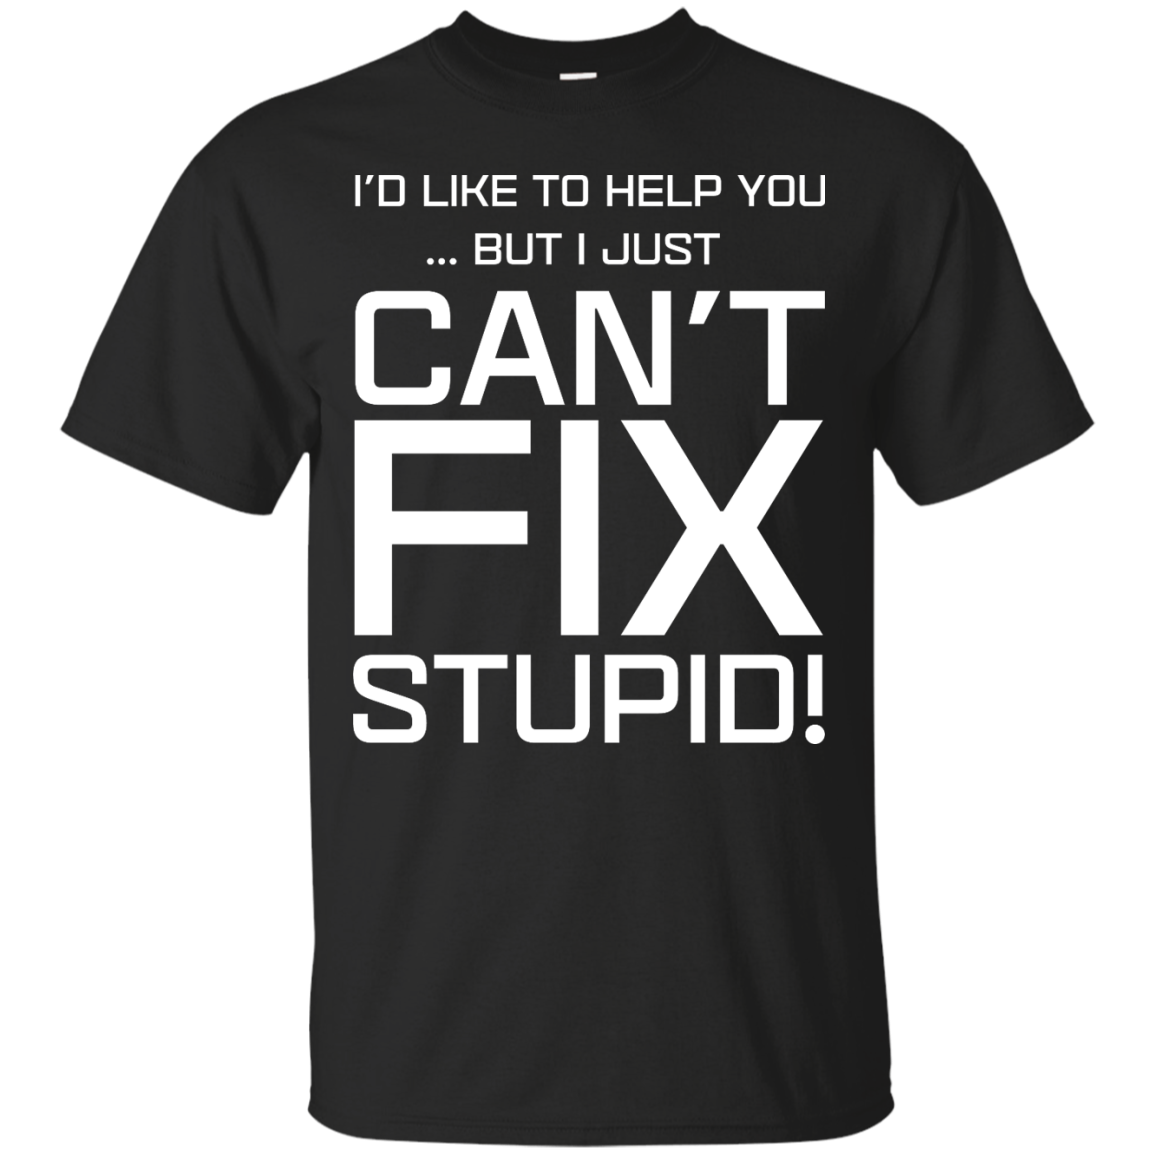 I'd Like To Help You, But I Just Can't Fix Stupid shirt, tank, hoodie